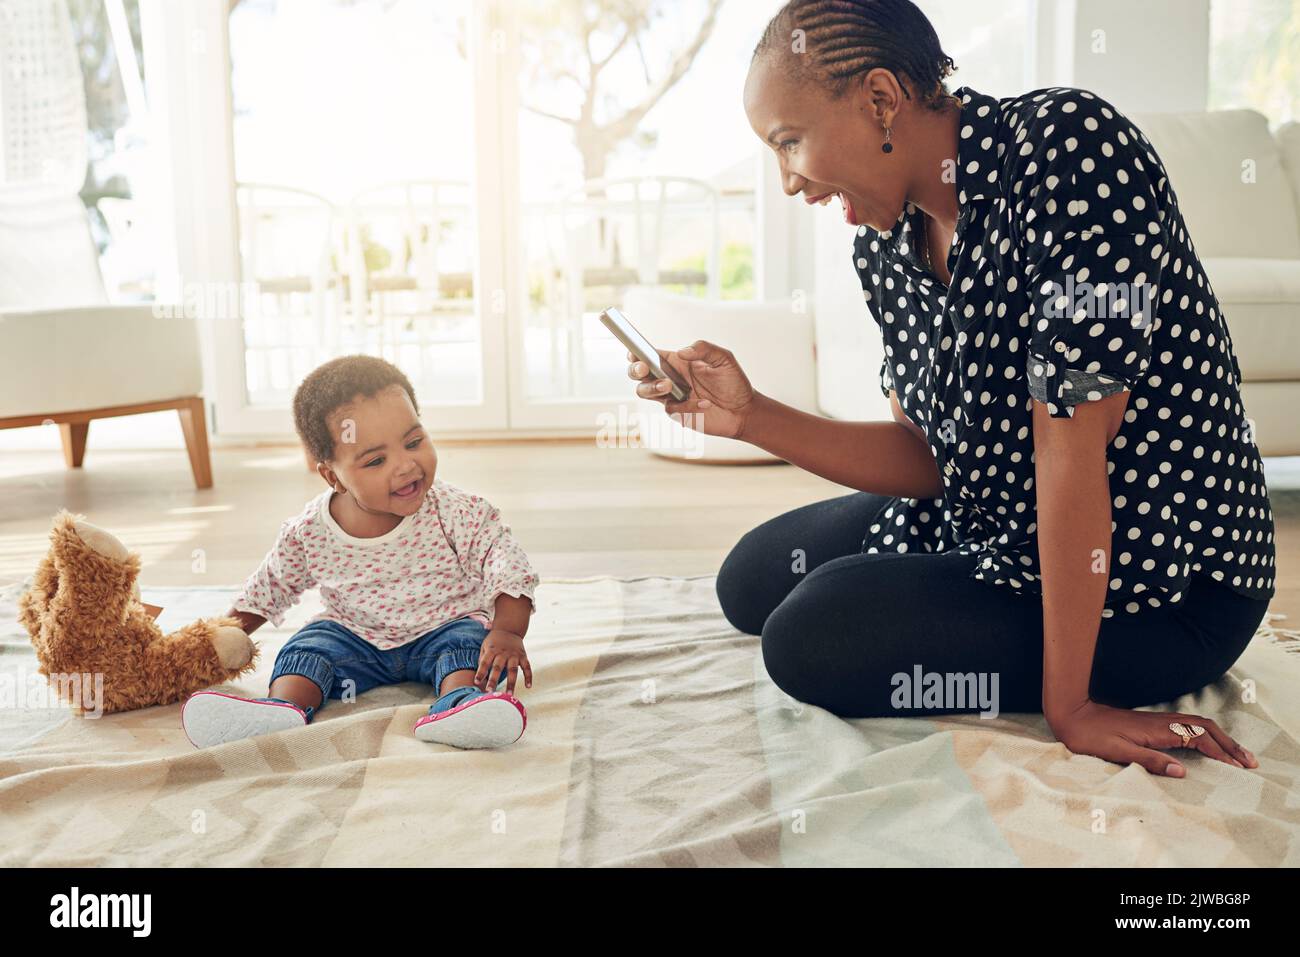 Fun times all around. a mother taking a photo of her baby girl. Stock Photo